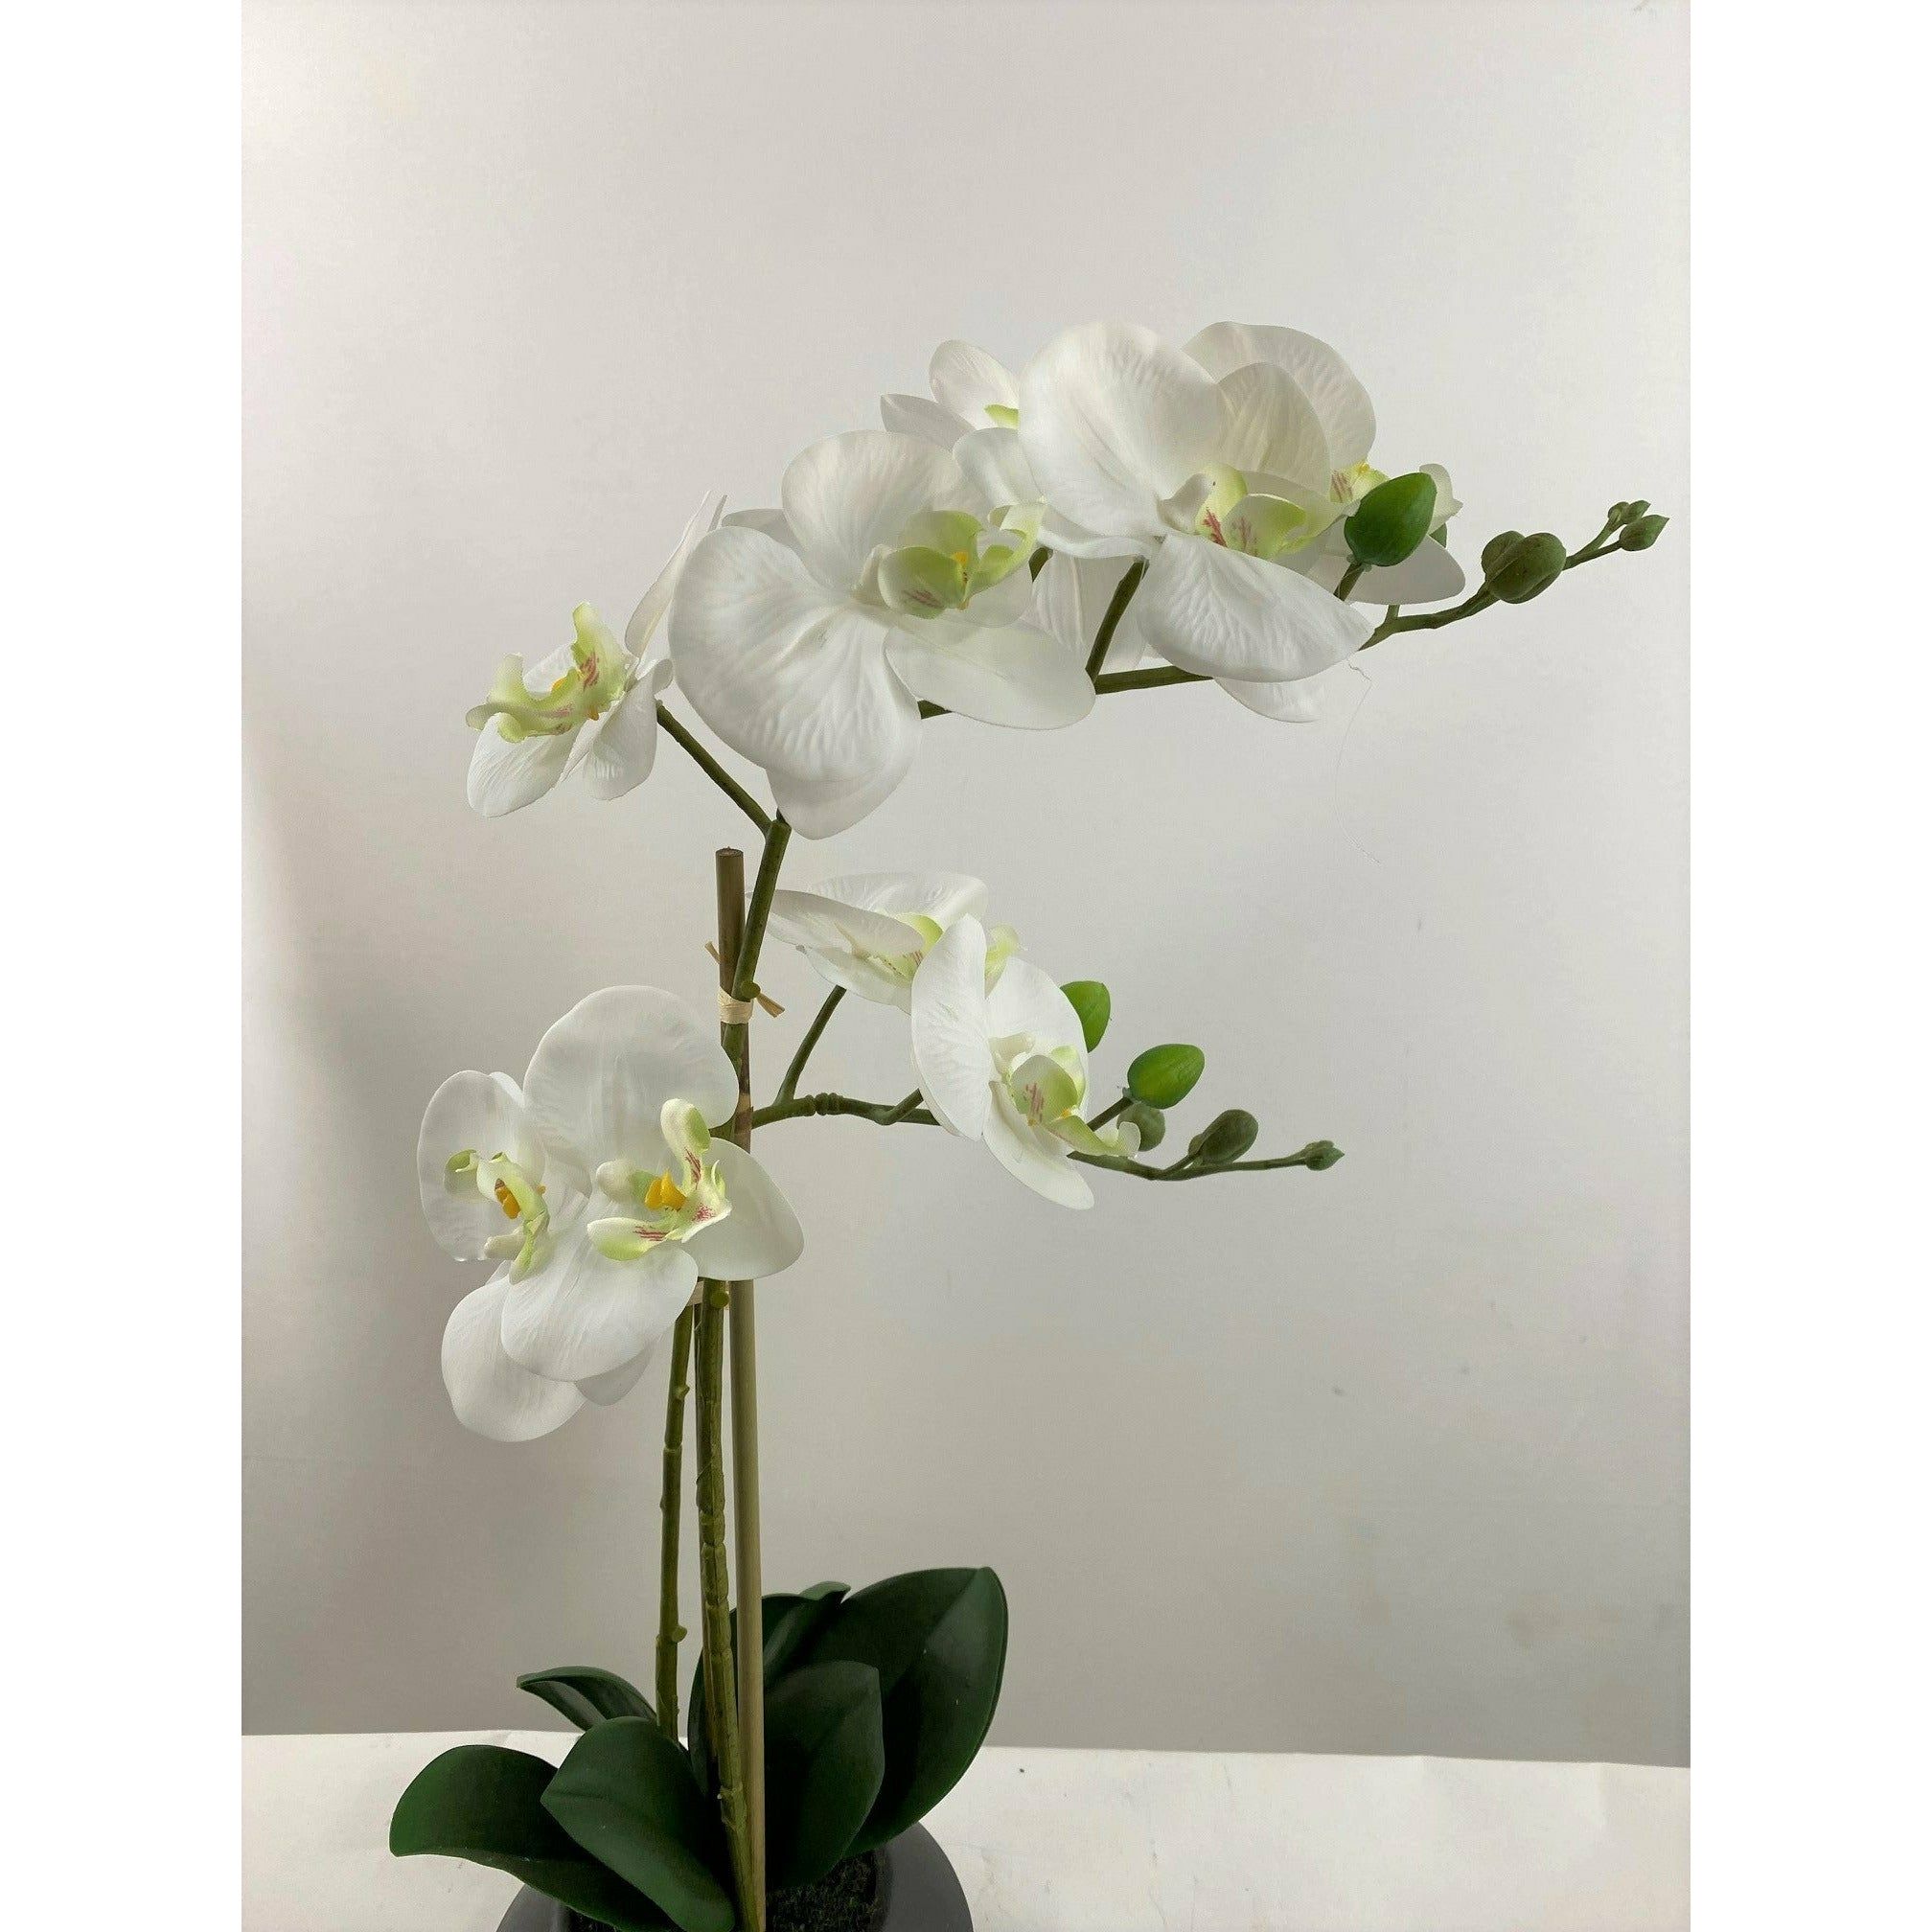 Phalaenopsis orchid 19" double stem with vase